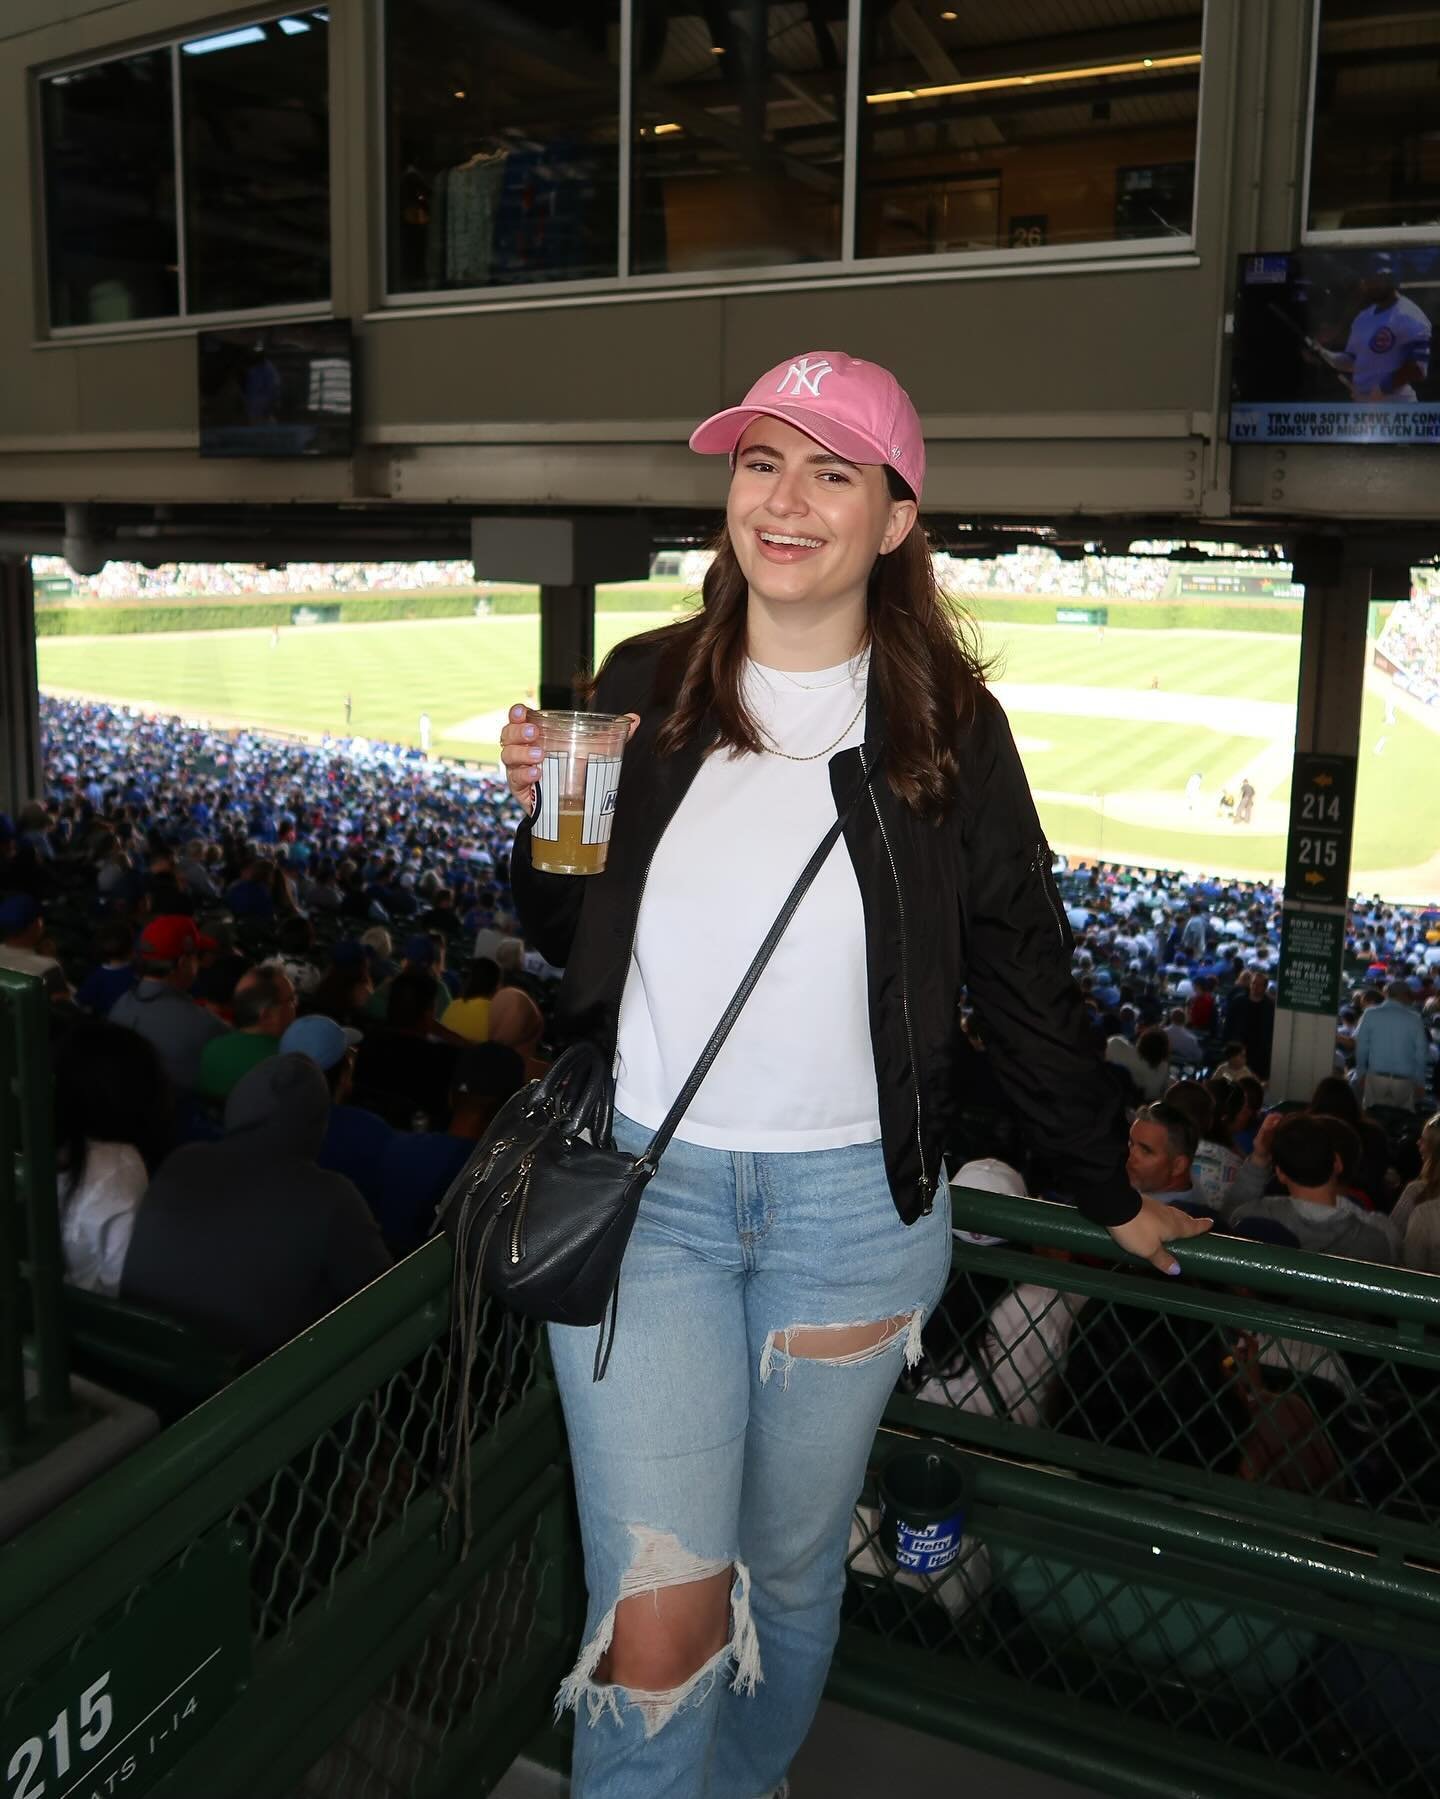 Play ball!!! ⚾️🍻🏟️☀️🧢 feels like summer in Chicago this weekend ✨

#wrigleyfield #chicagocubs #stylebyausten